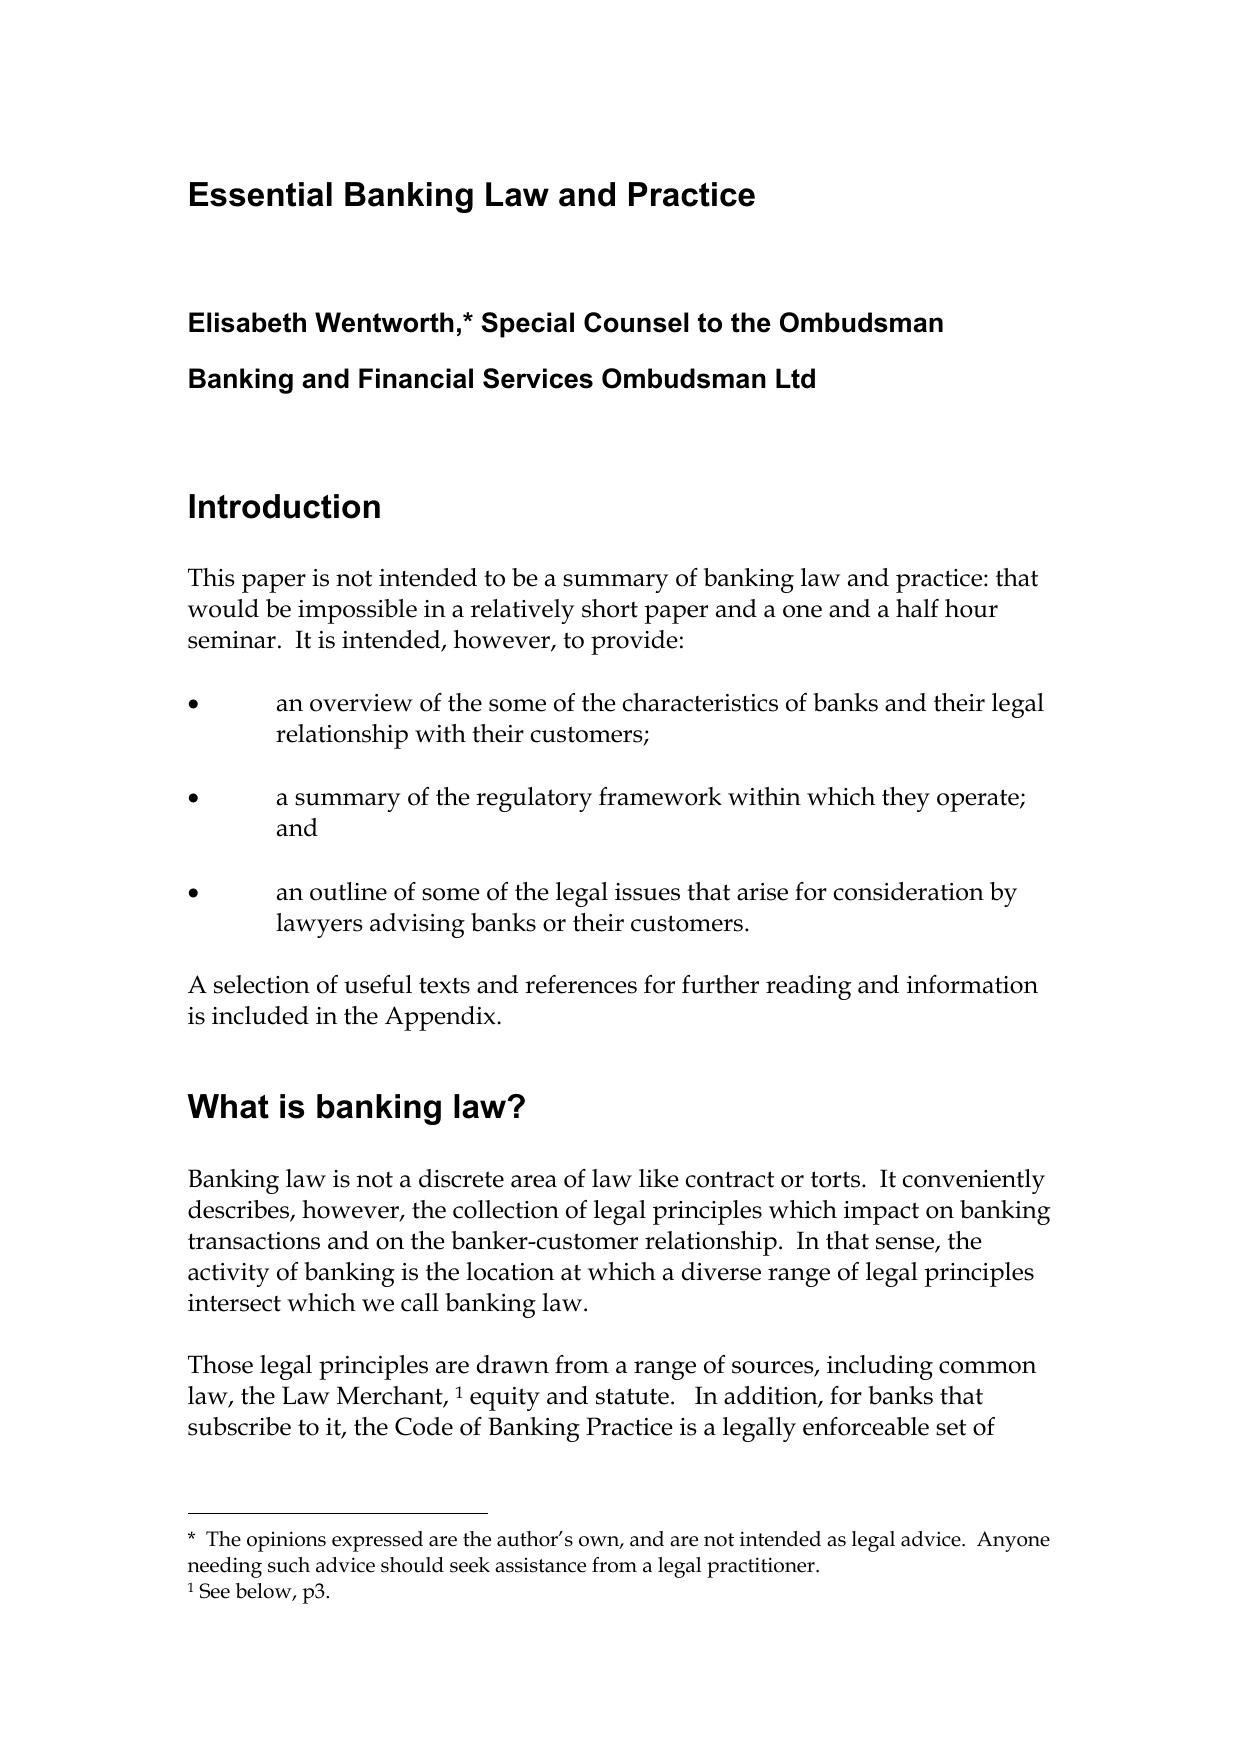 Microsoft Word - LIV Paper July 07 Essentials in banking law and practice EW.doc